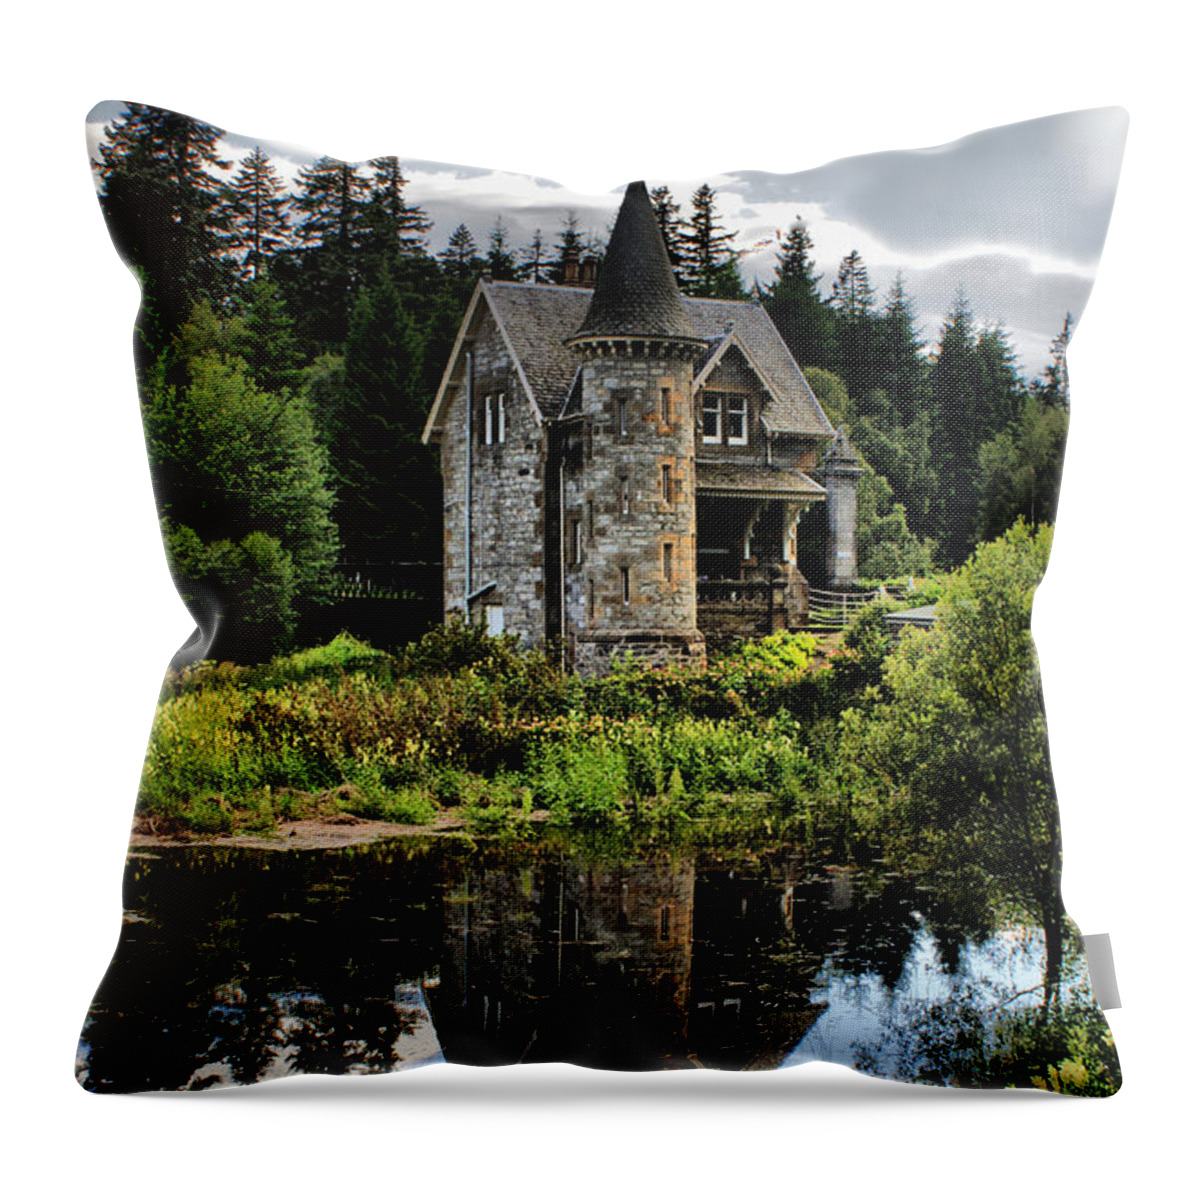 Castle Throw Pillow featuring the photograph Fairytale Castle Gatelodge by Sandra Cockayne ADPS